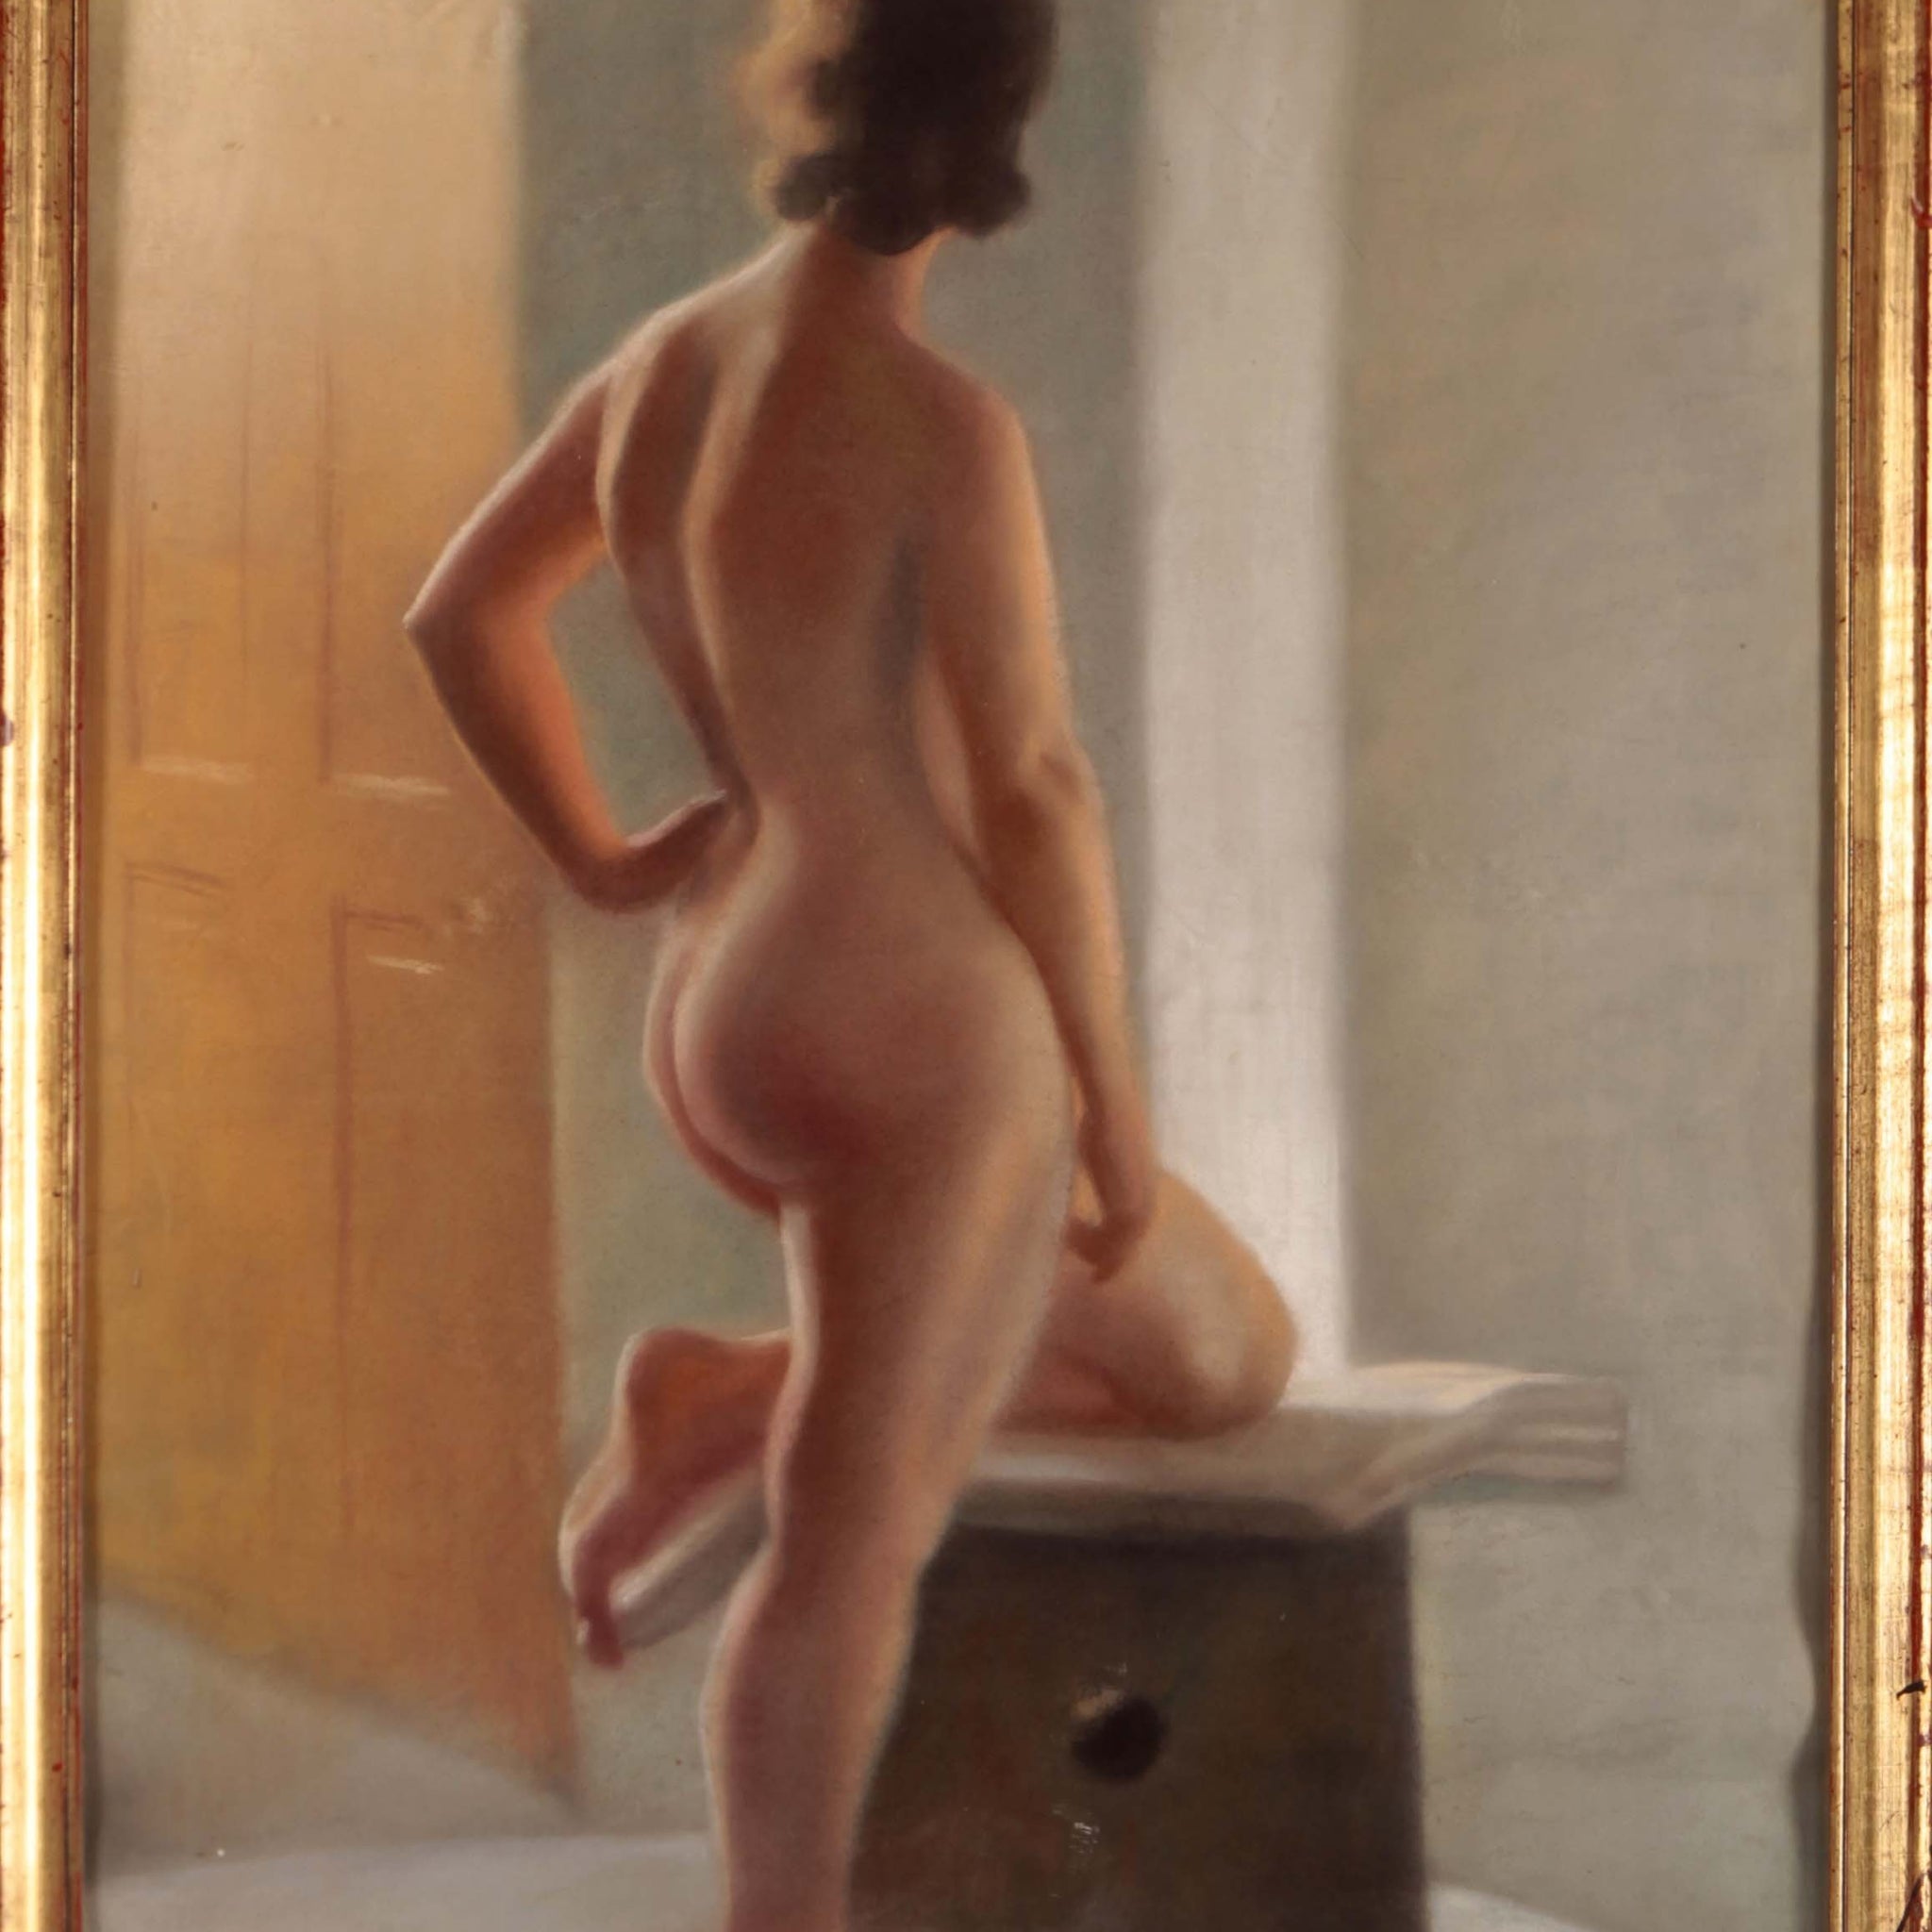 Antique pastel painting from the early 1900s depicting a female nude